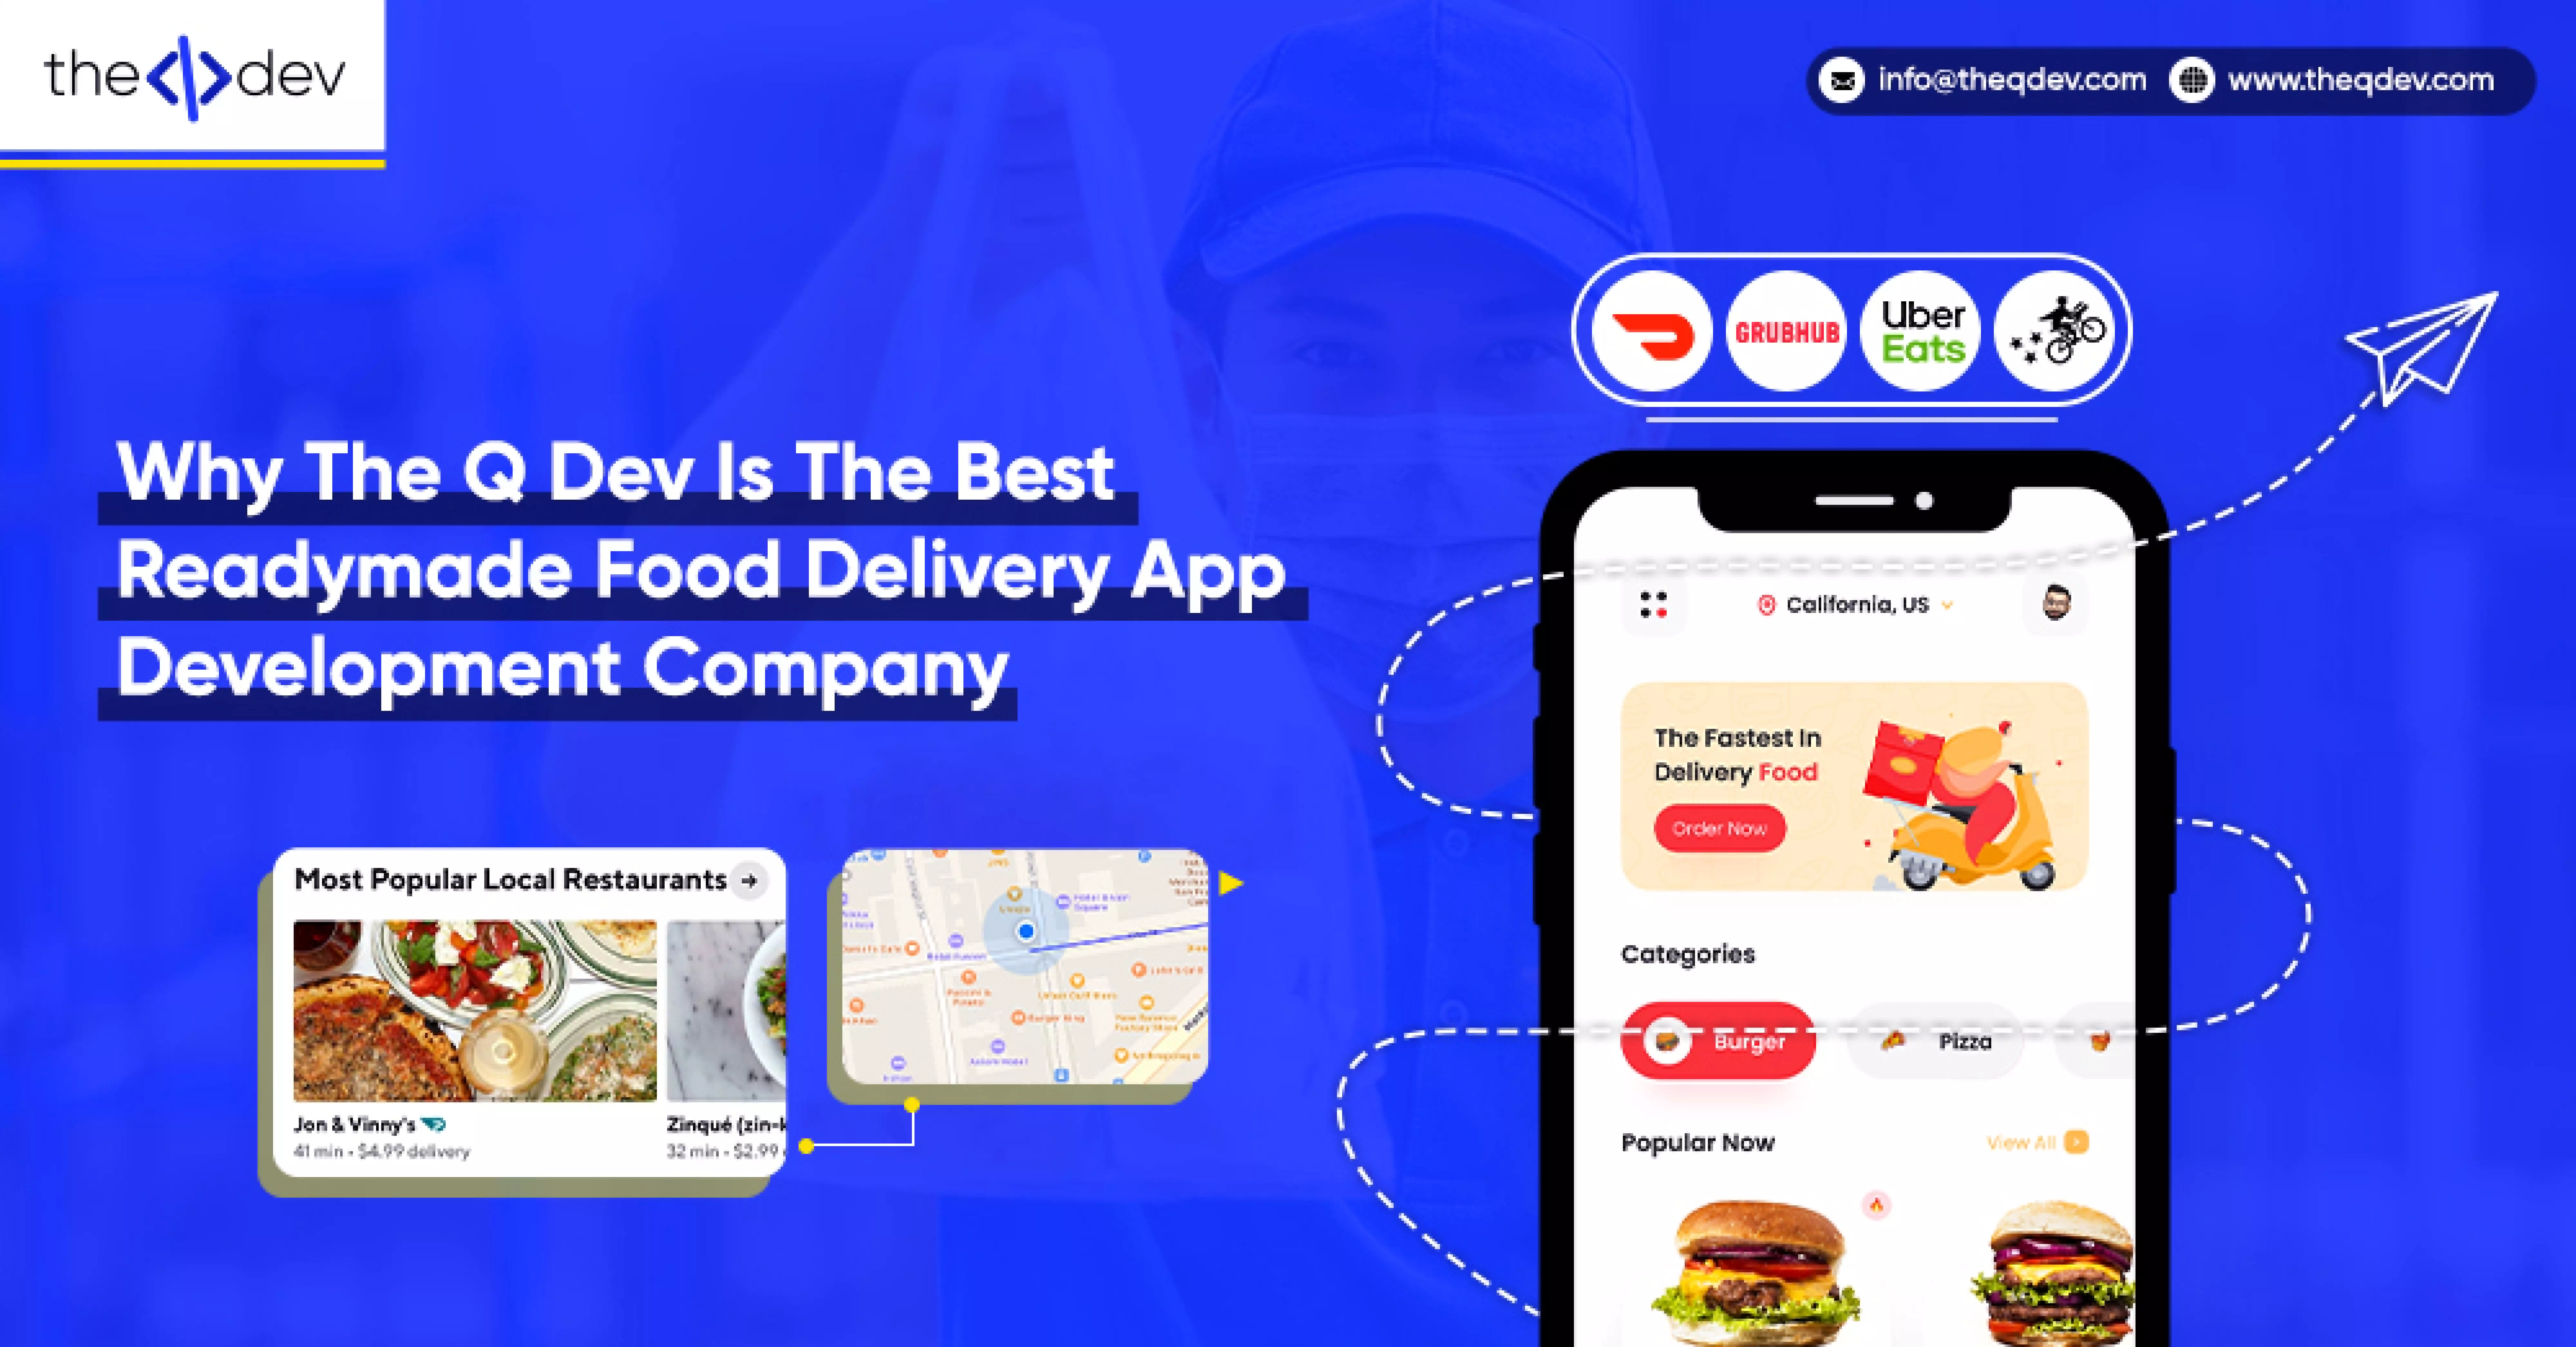 Why The Q Dev Is The Best Readymade Food Delivery App Development Company